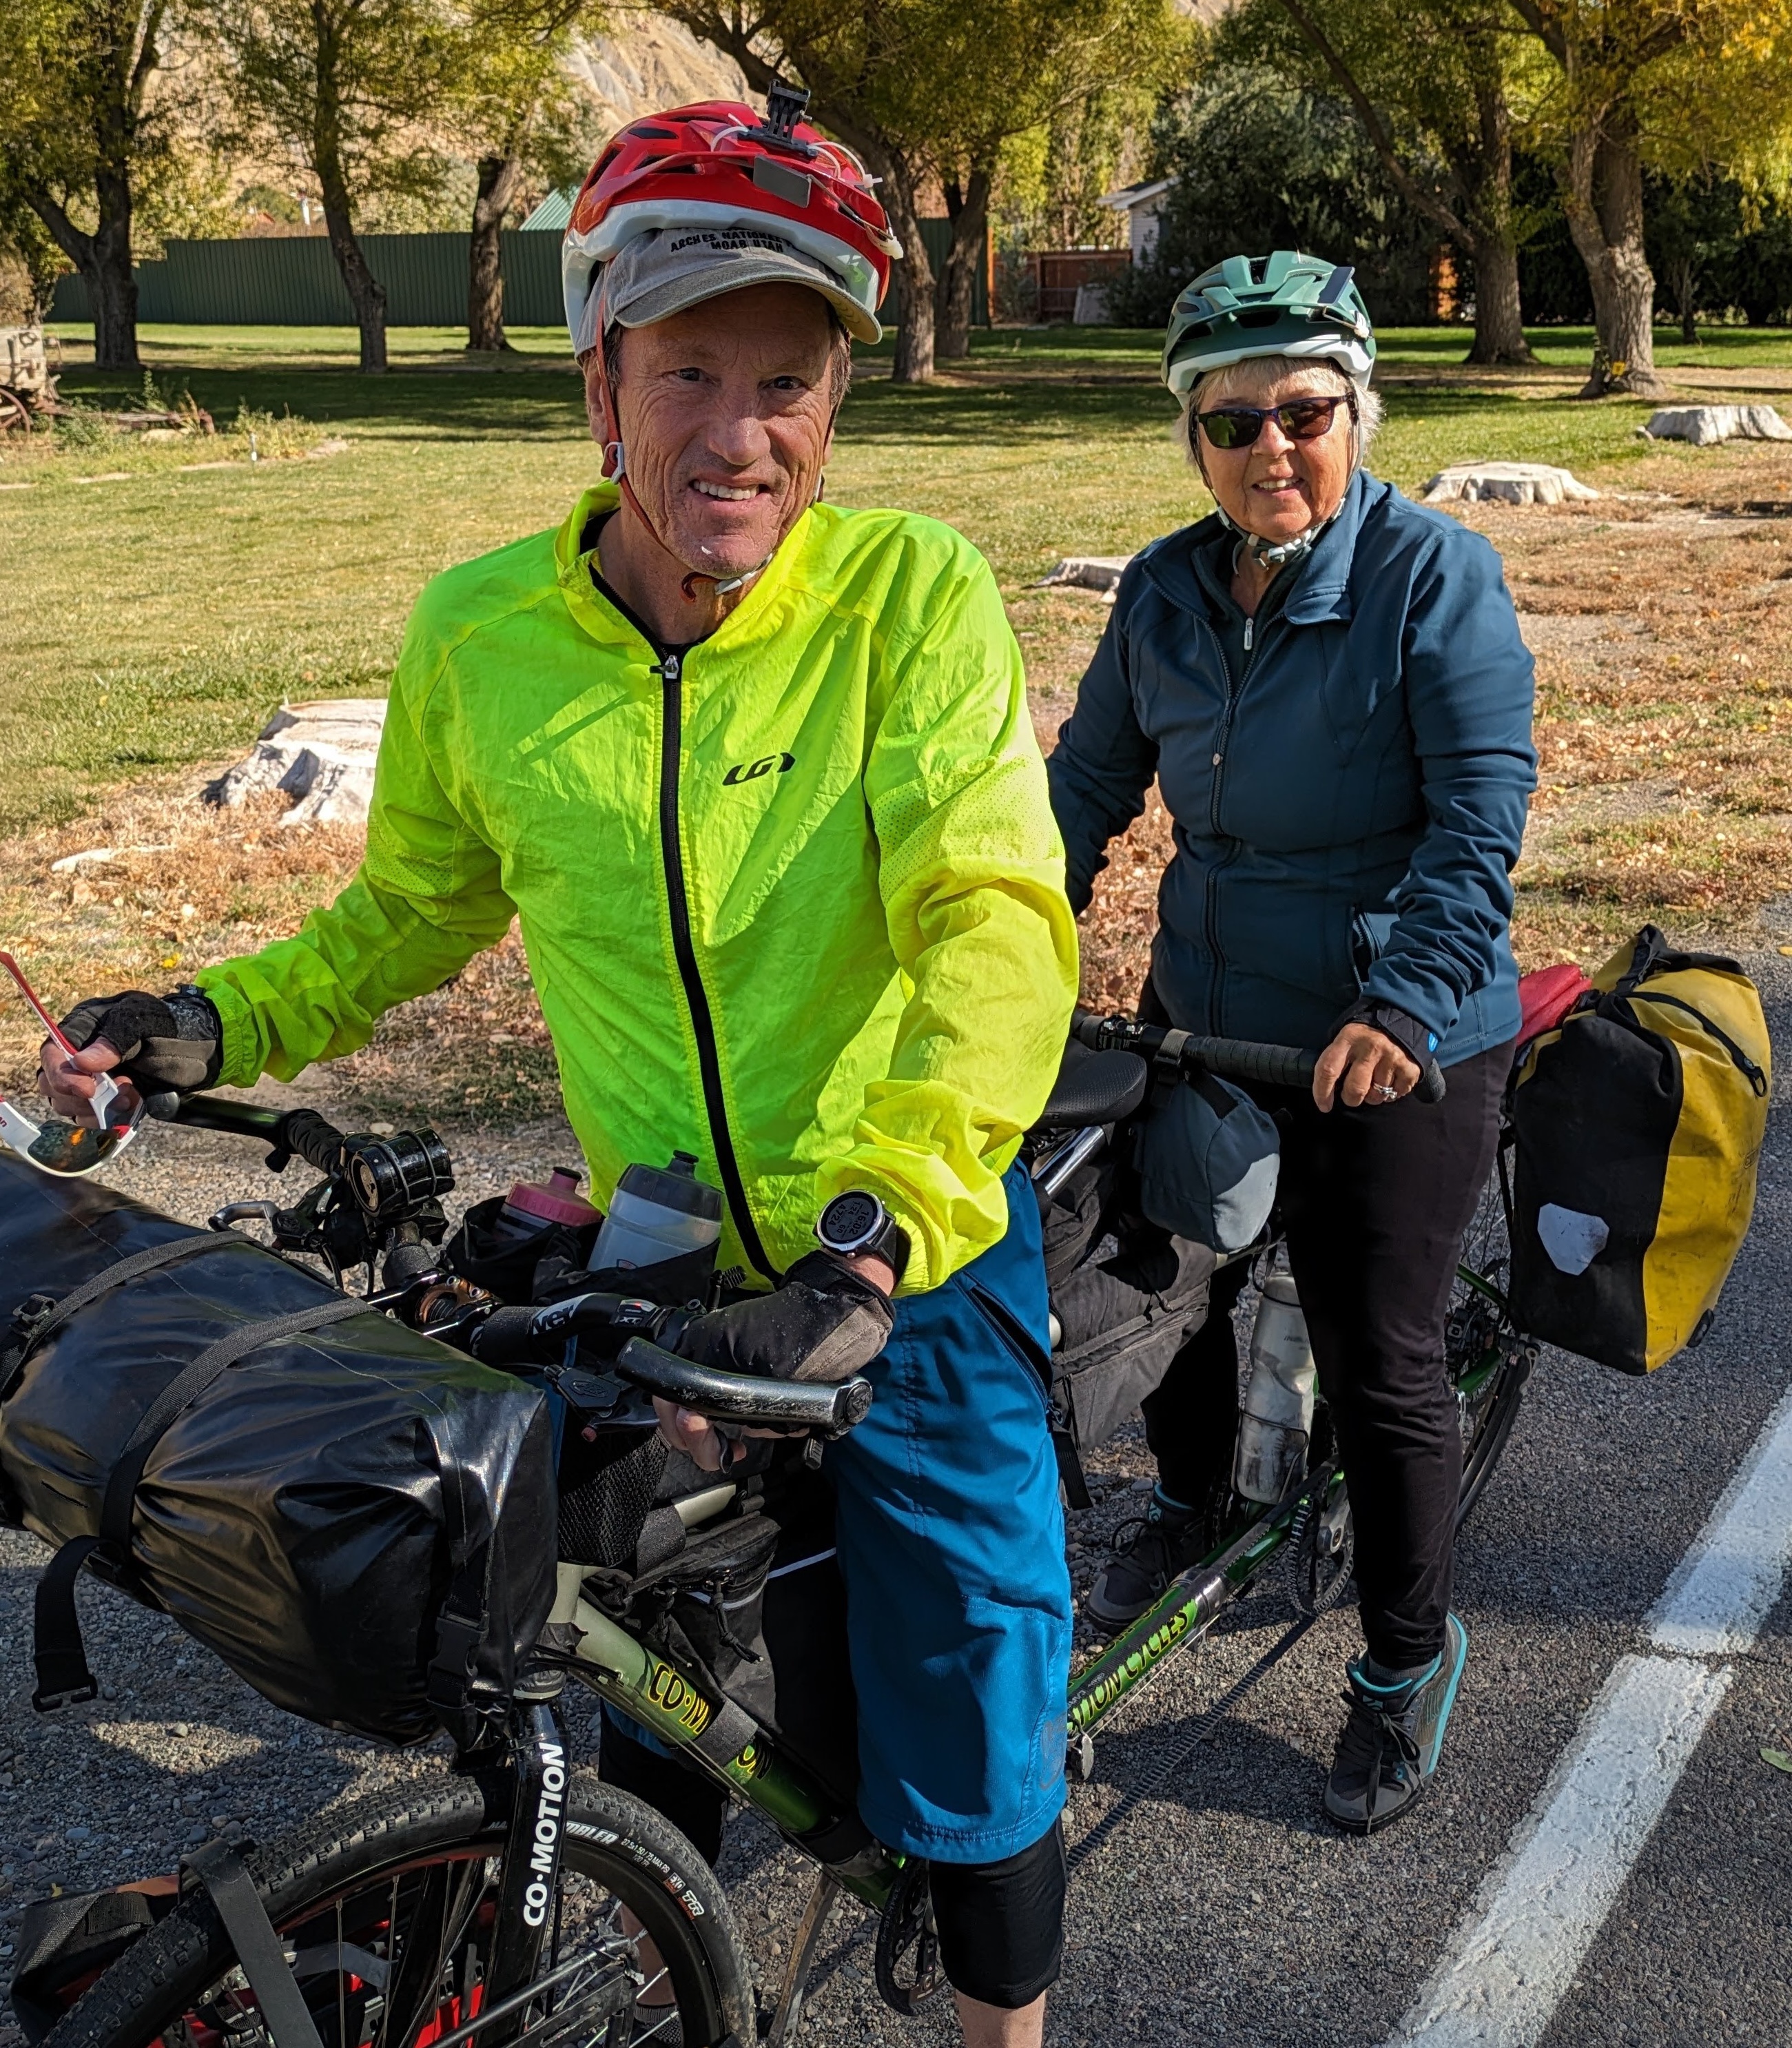 Randy Fay and wife Nancy on loaded tandem bicycle